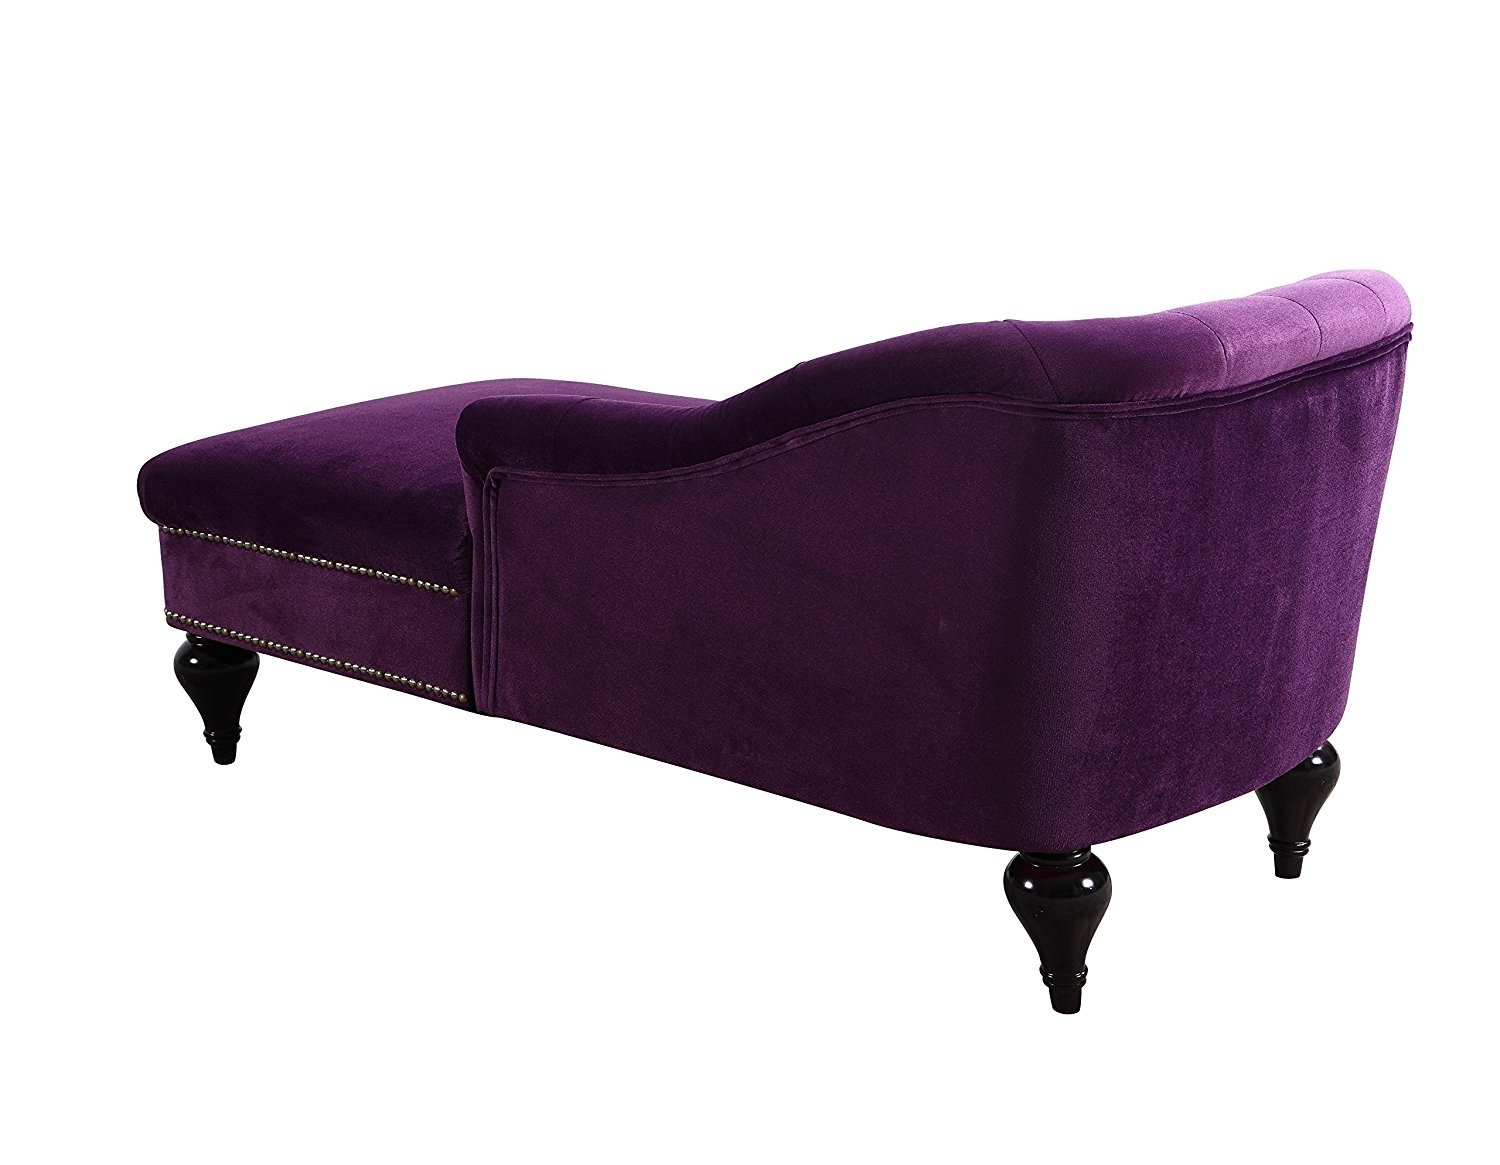 Dark Purple Chaise Lounge For Living Room